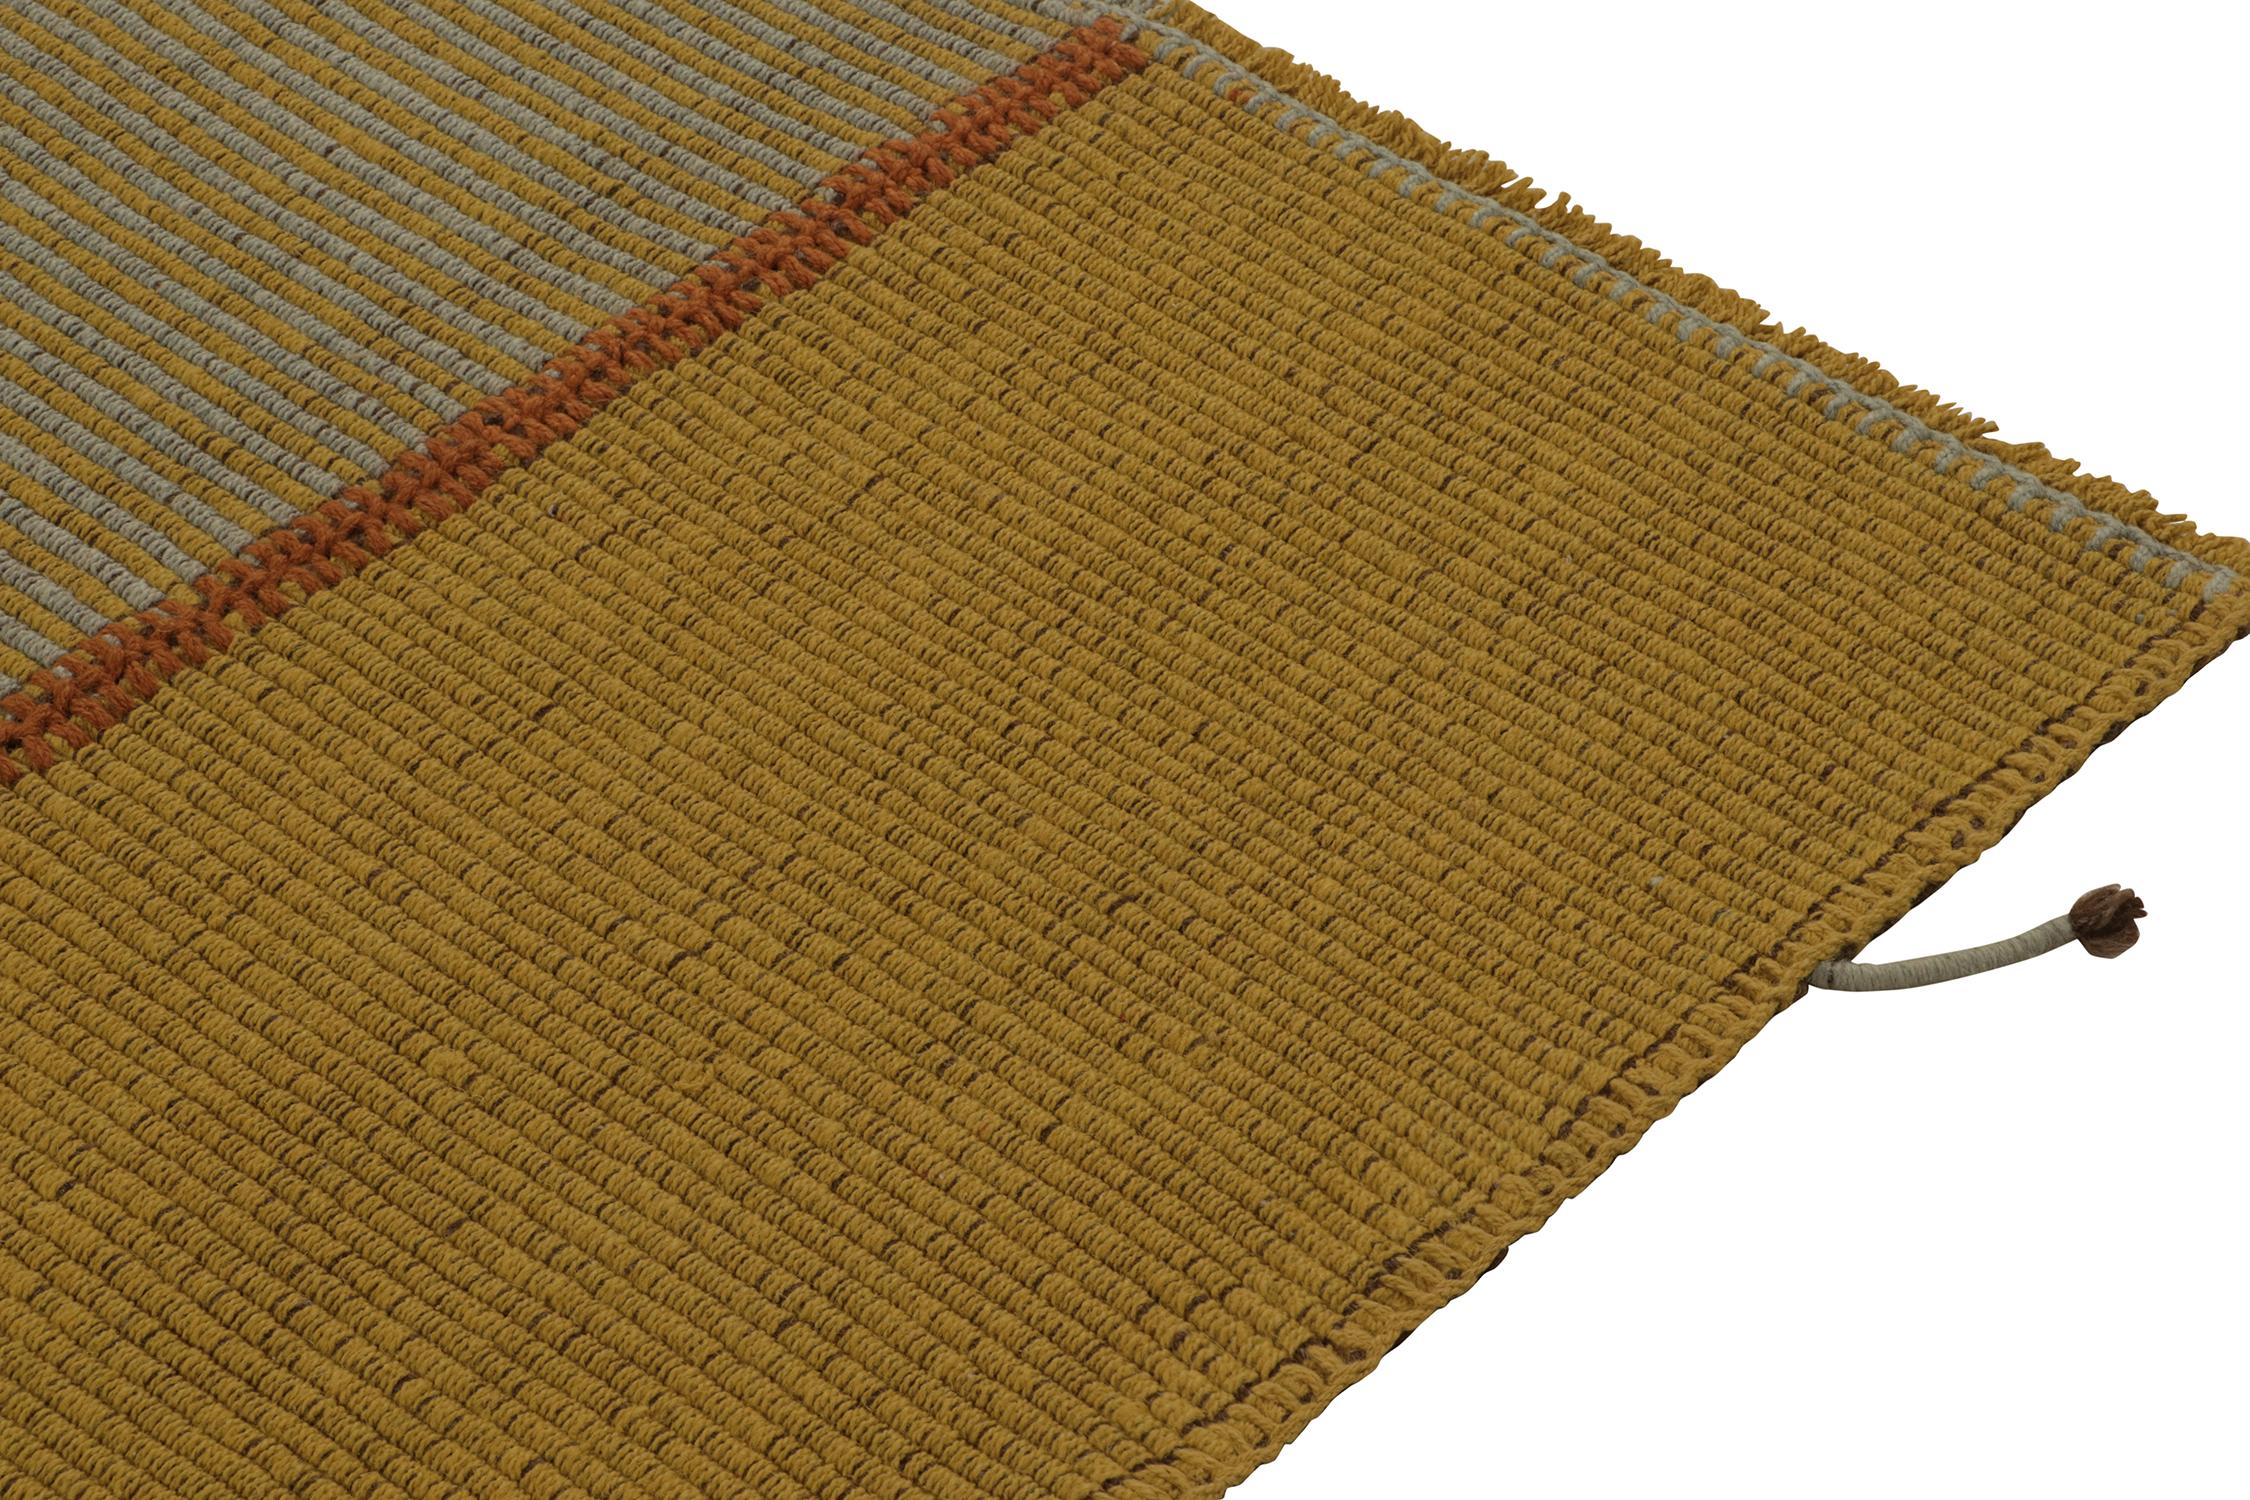 Hand-Knotted Rug & Kilim’s Contemporary Square Kilim in Ochre, Blue Stripes and Brown Accents For Sale